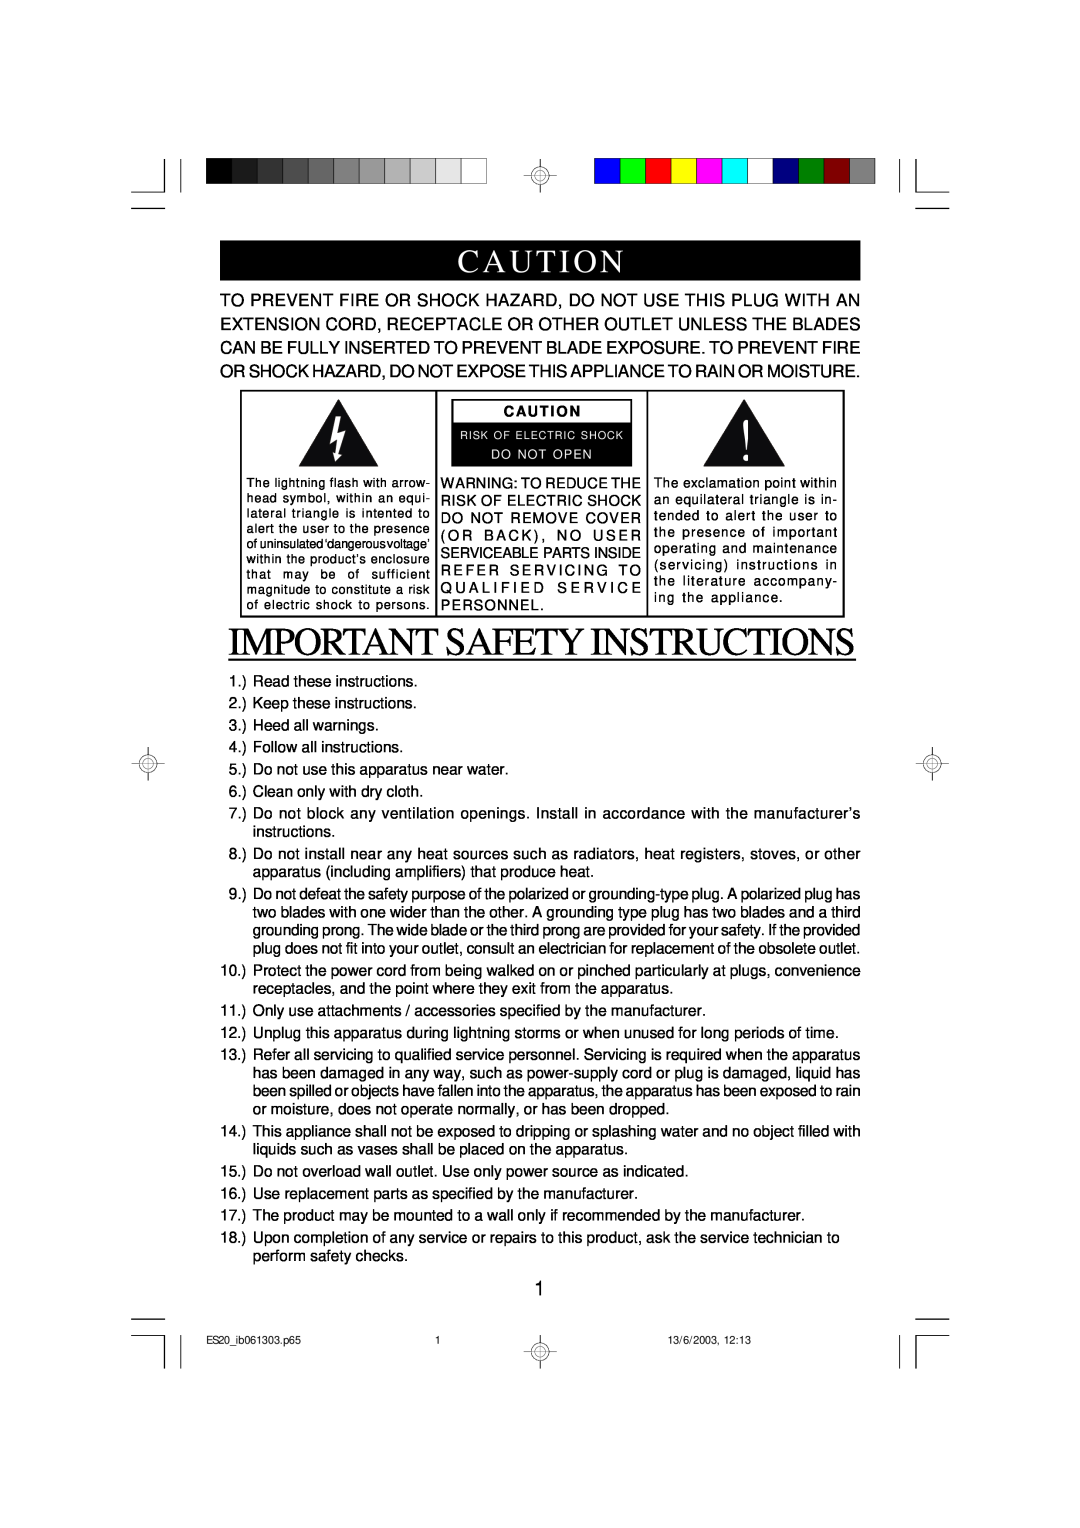 Emerson ES20 owner manual Important Safety Instructions, Caut I On, Caut I O N 